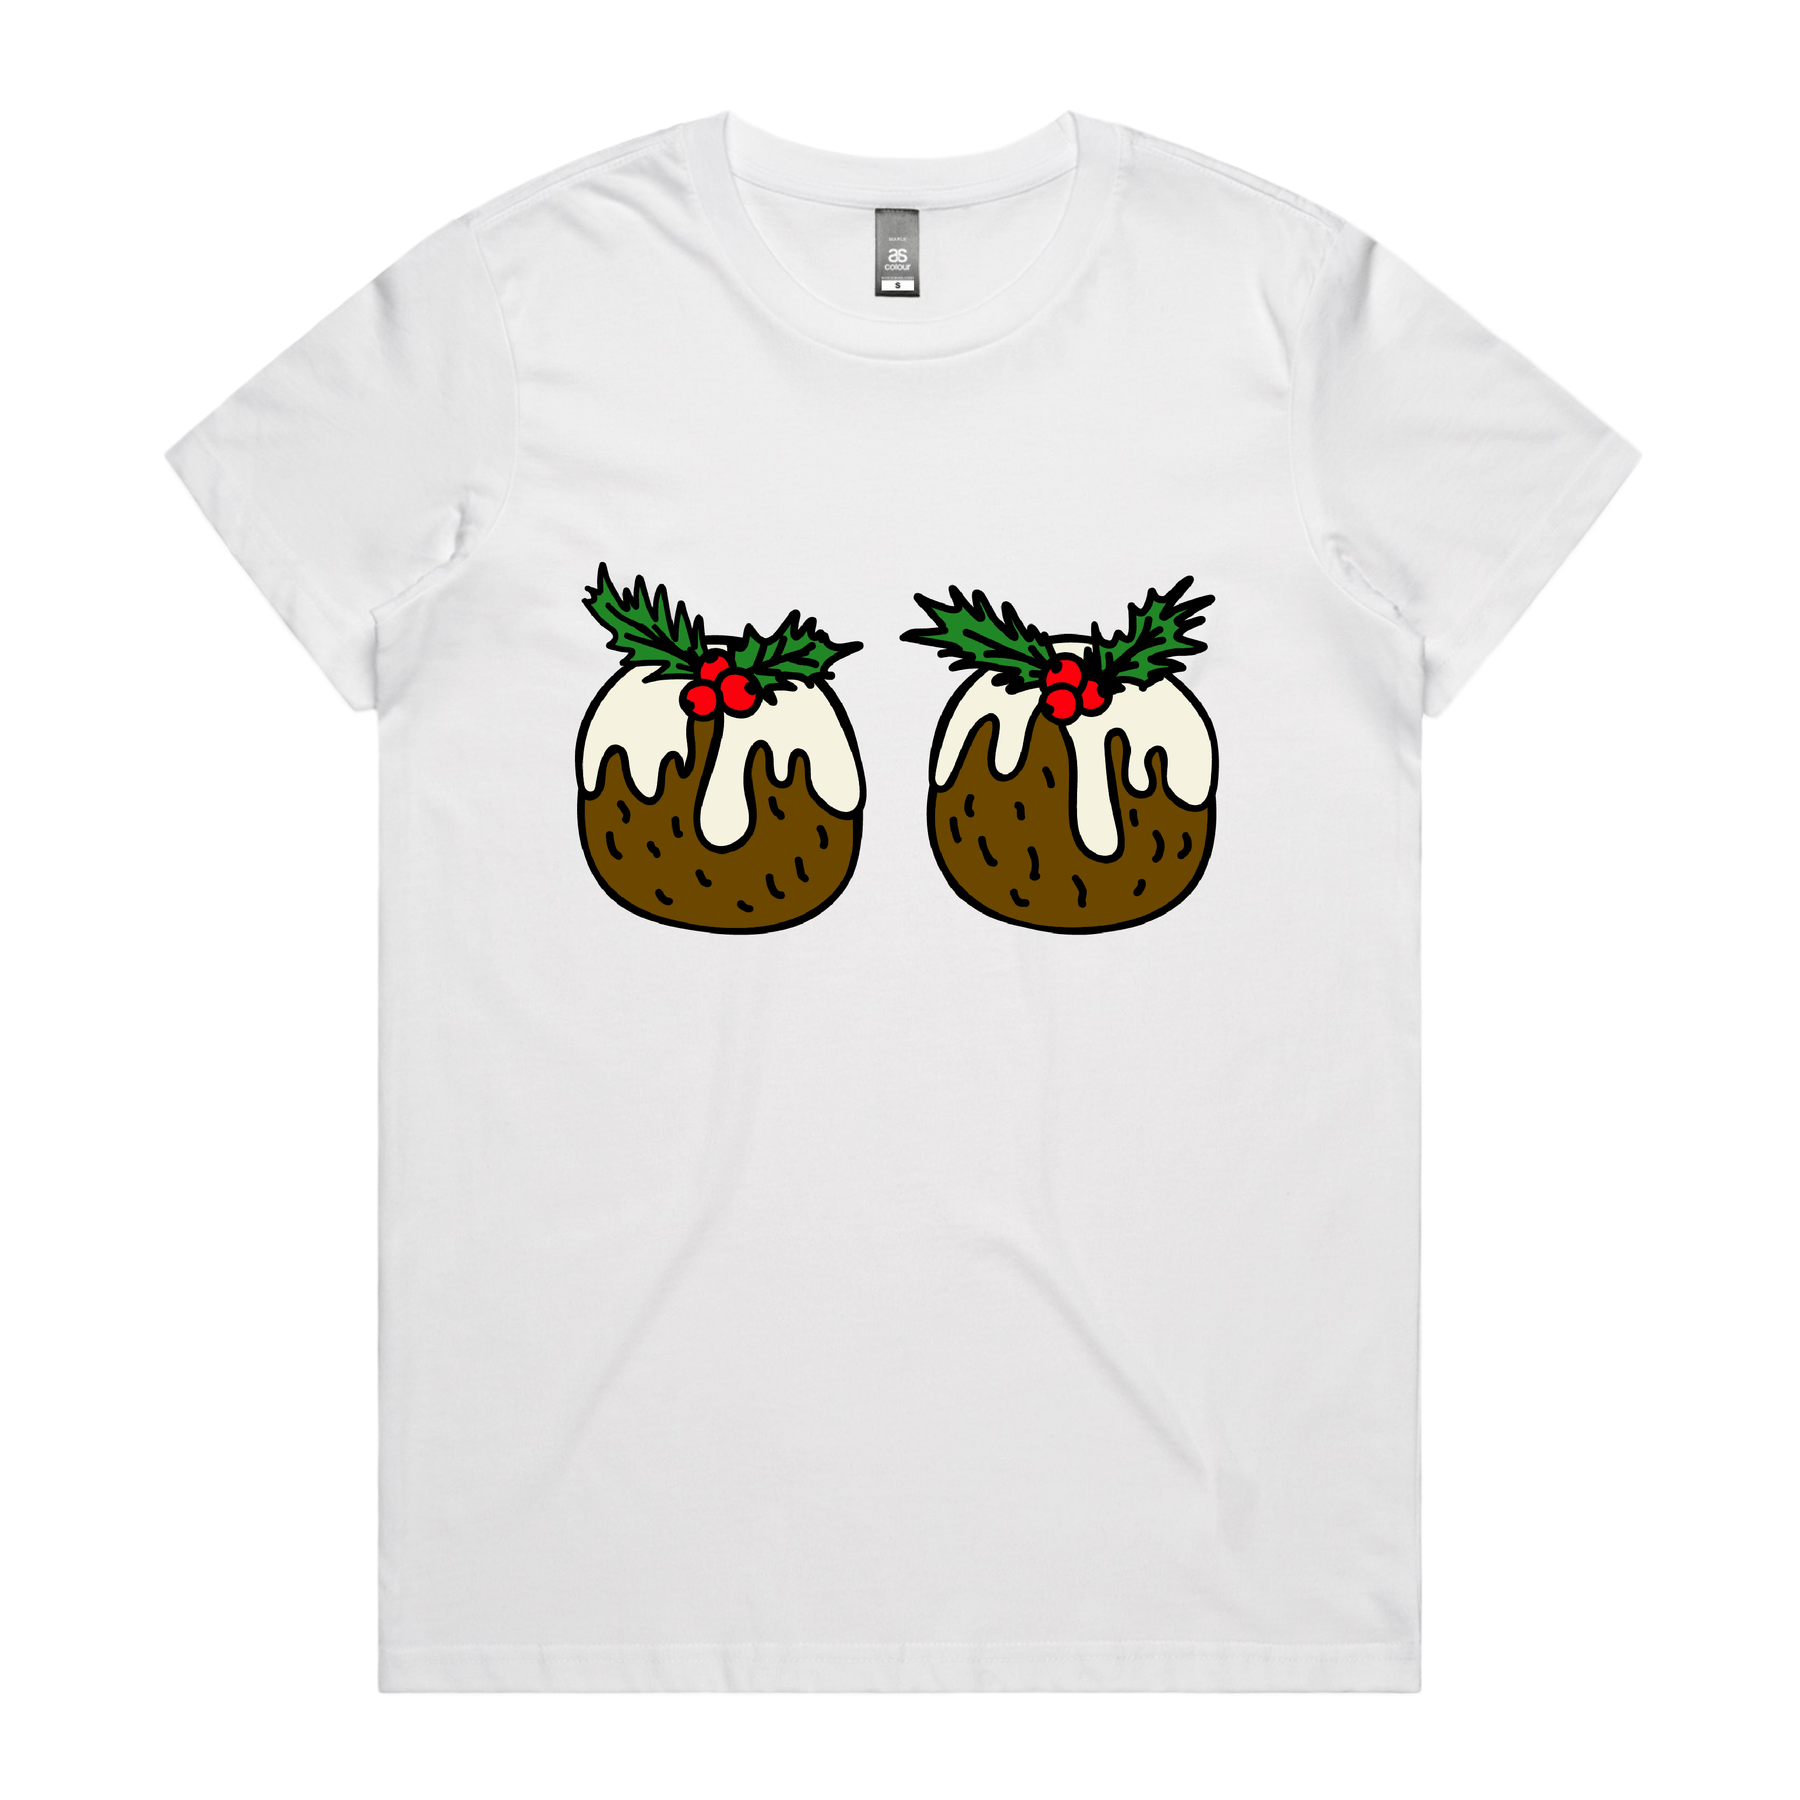 XS / White / Large Front Design Christmas Puddings 🌰🌰 – Women's T Shirt